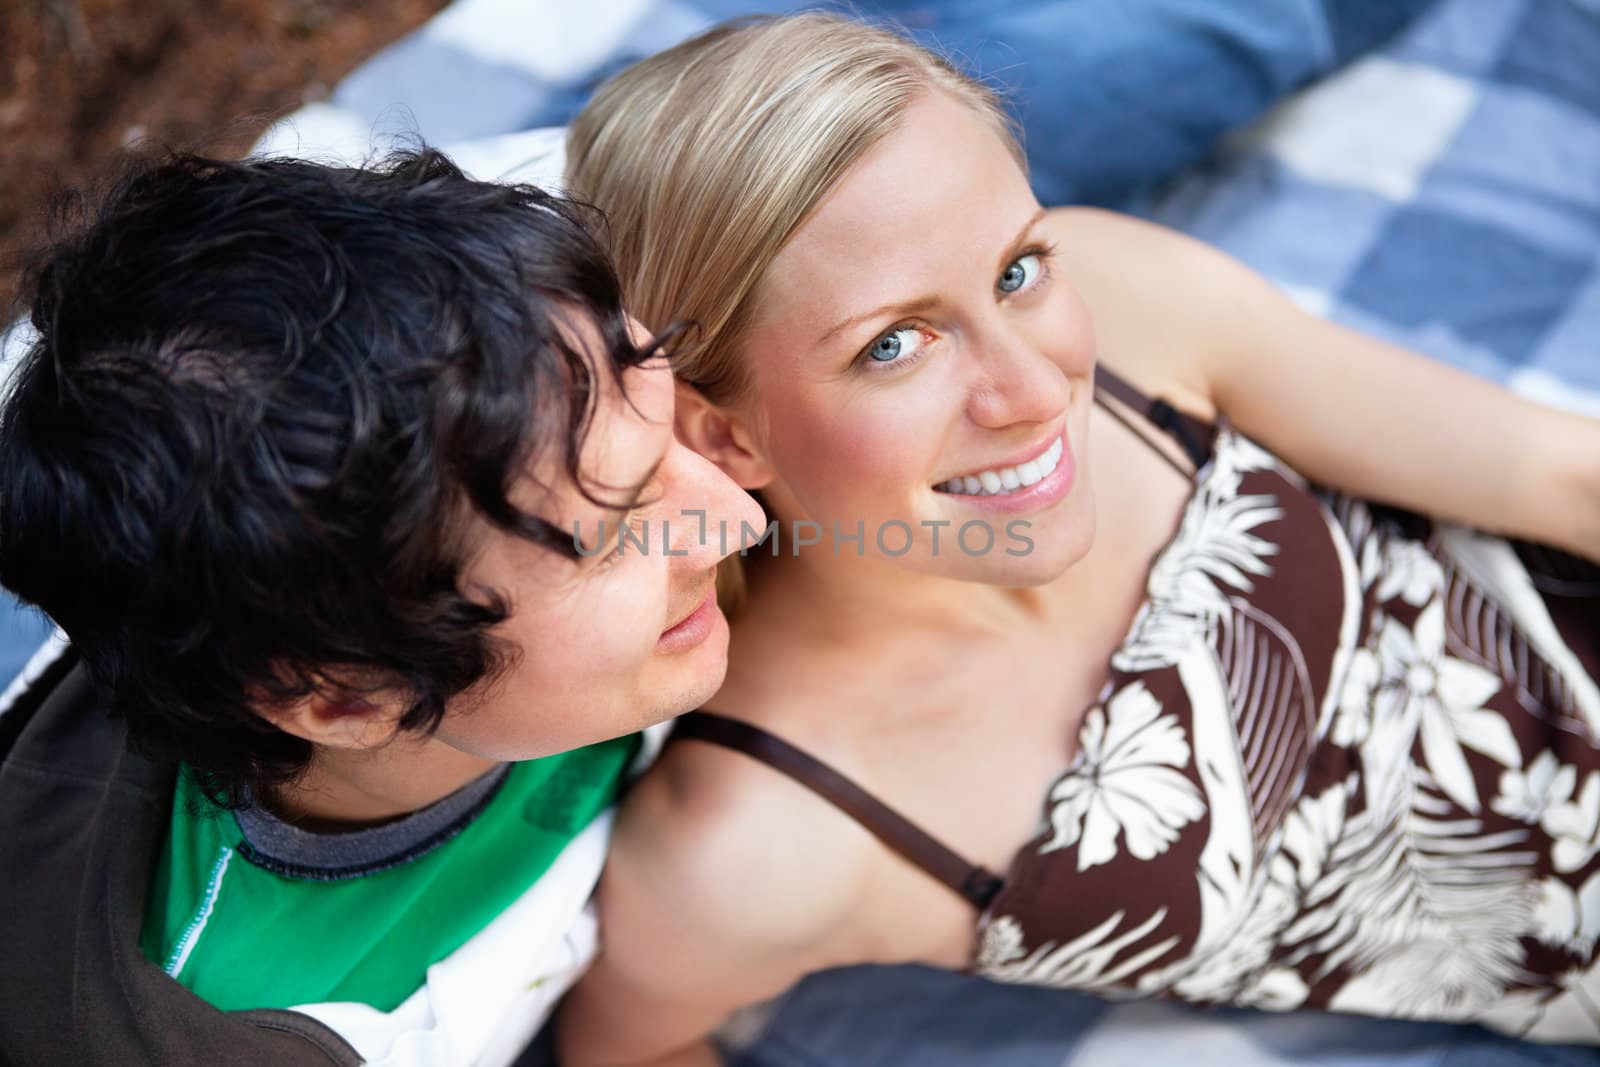 Young couple relaxing on picnic blanket by leaf